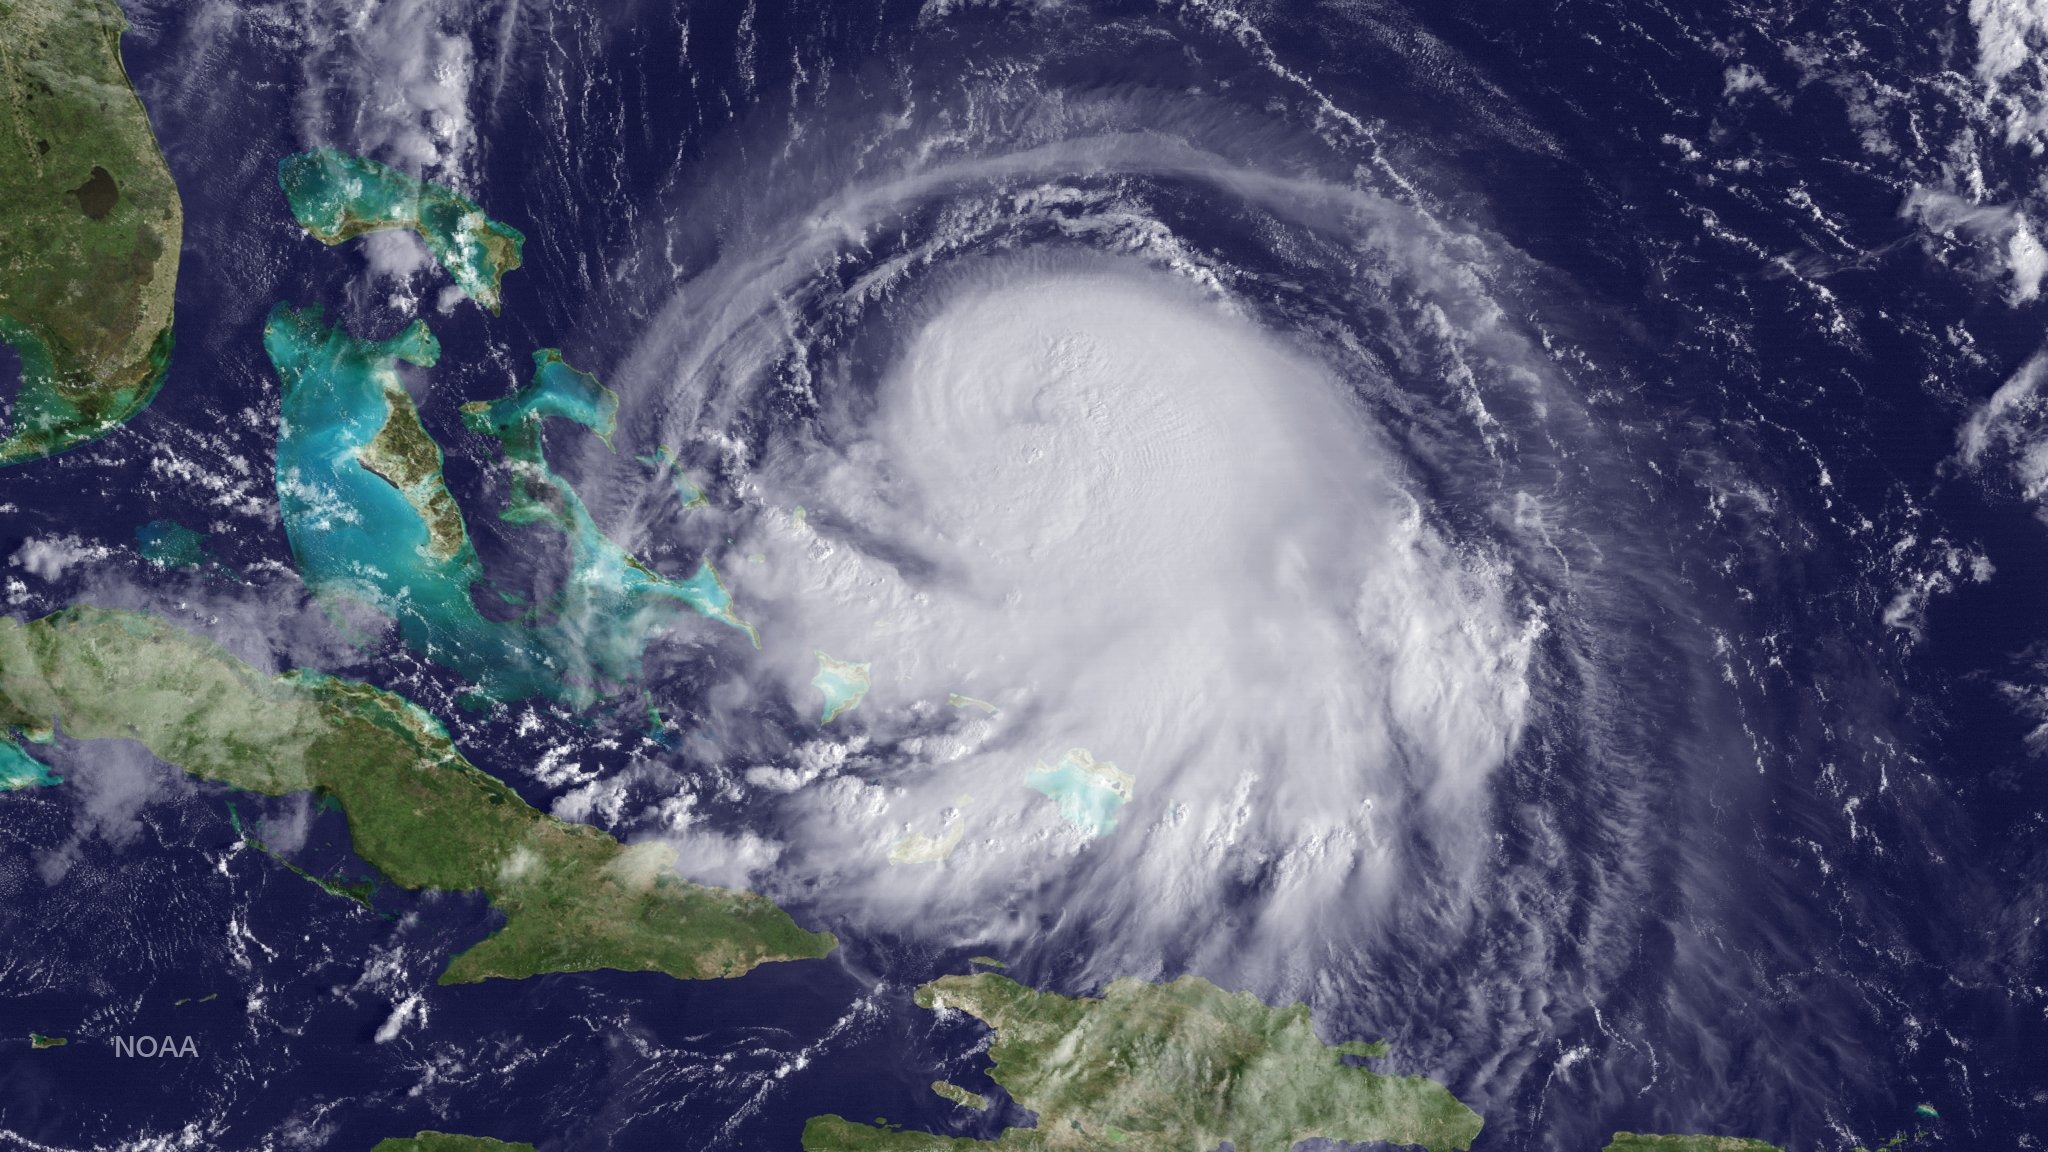 Hurricane Joaquin is seen churning in the Caribbean on Sept. 30, 2015. (NOAA/Getty Images)